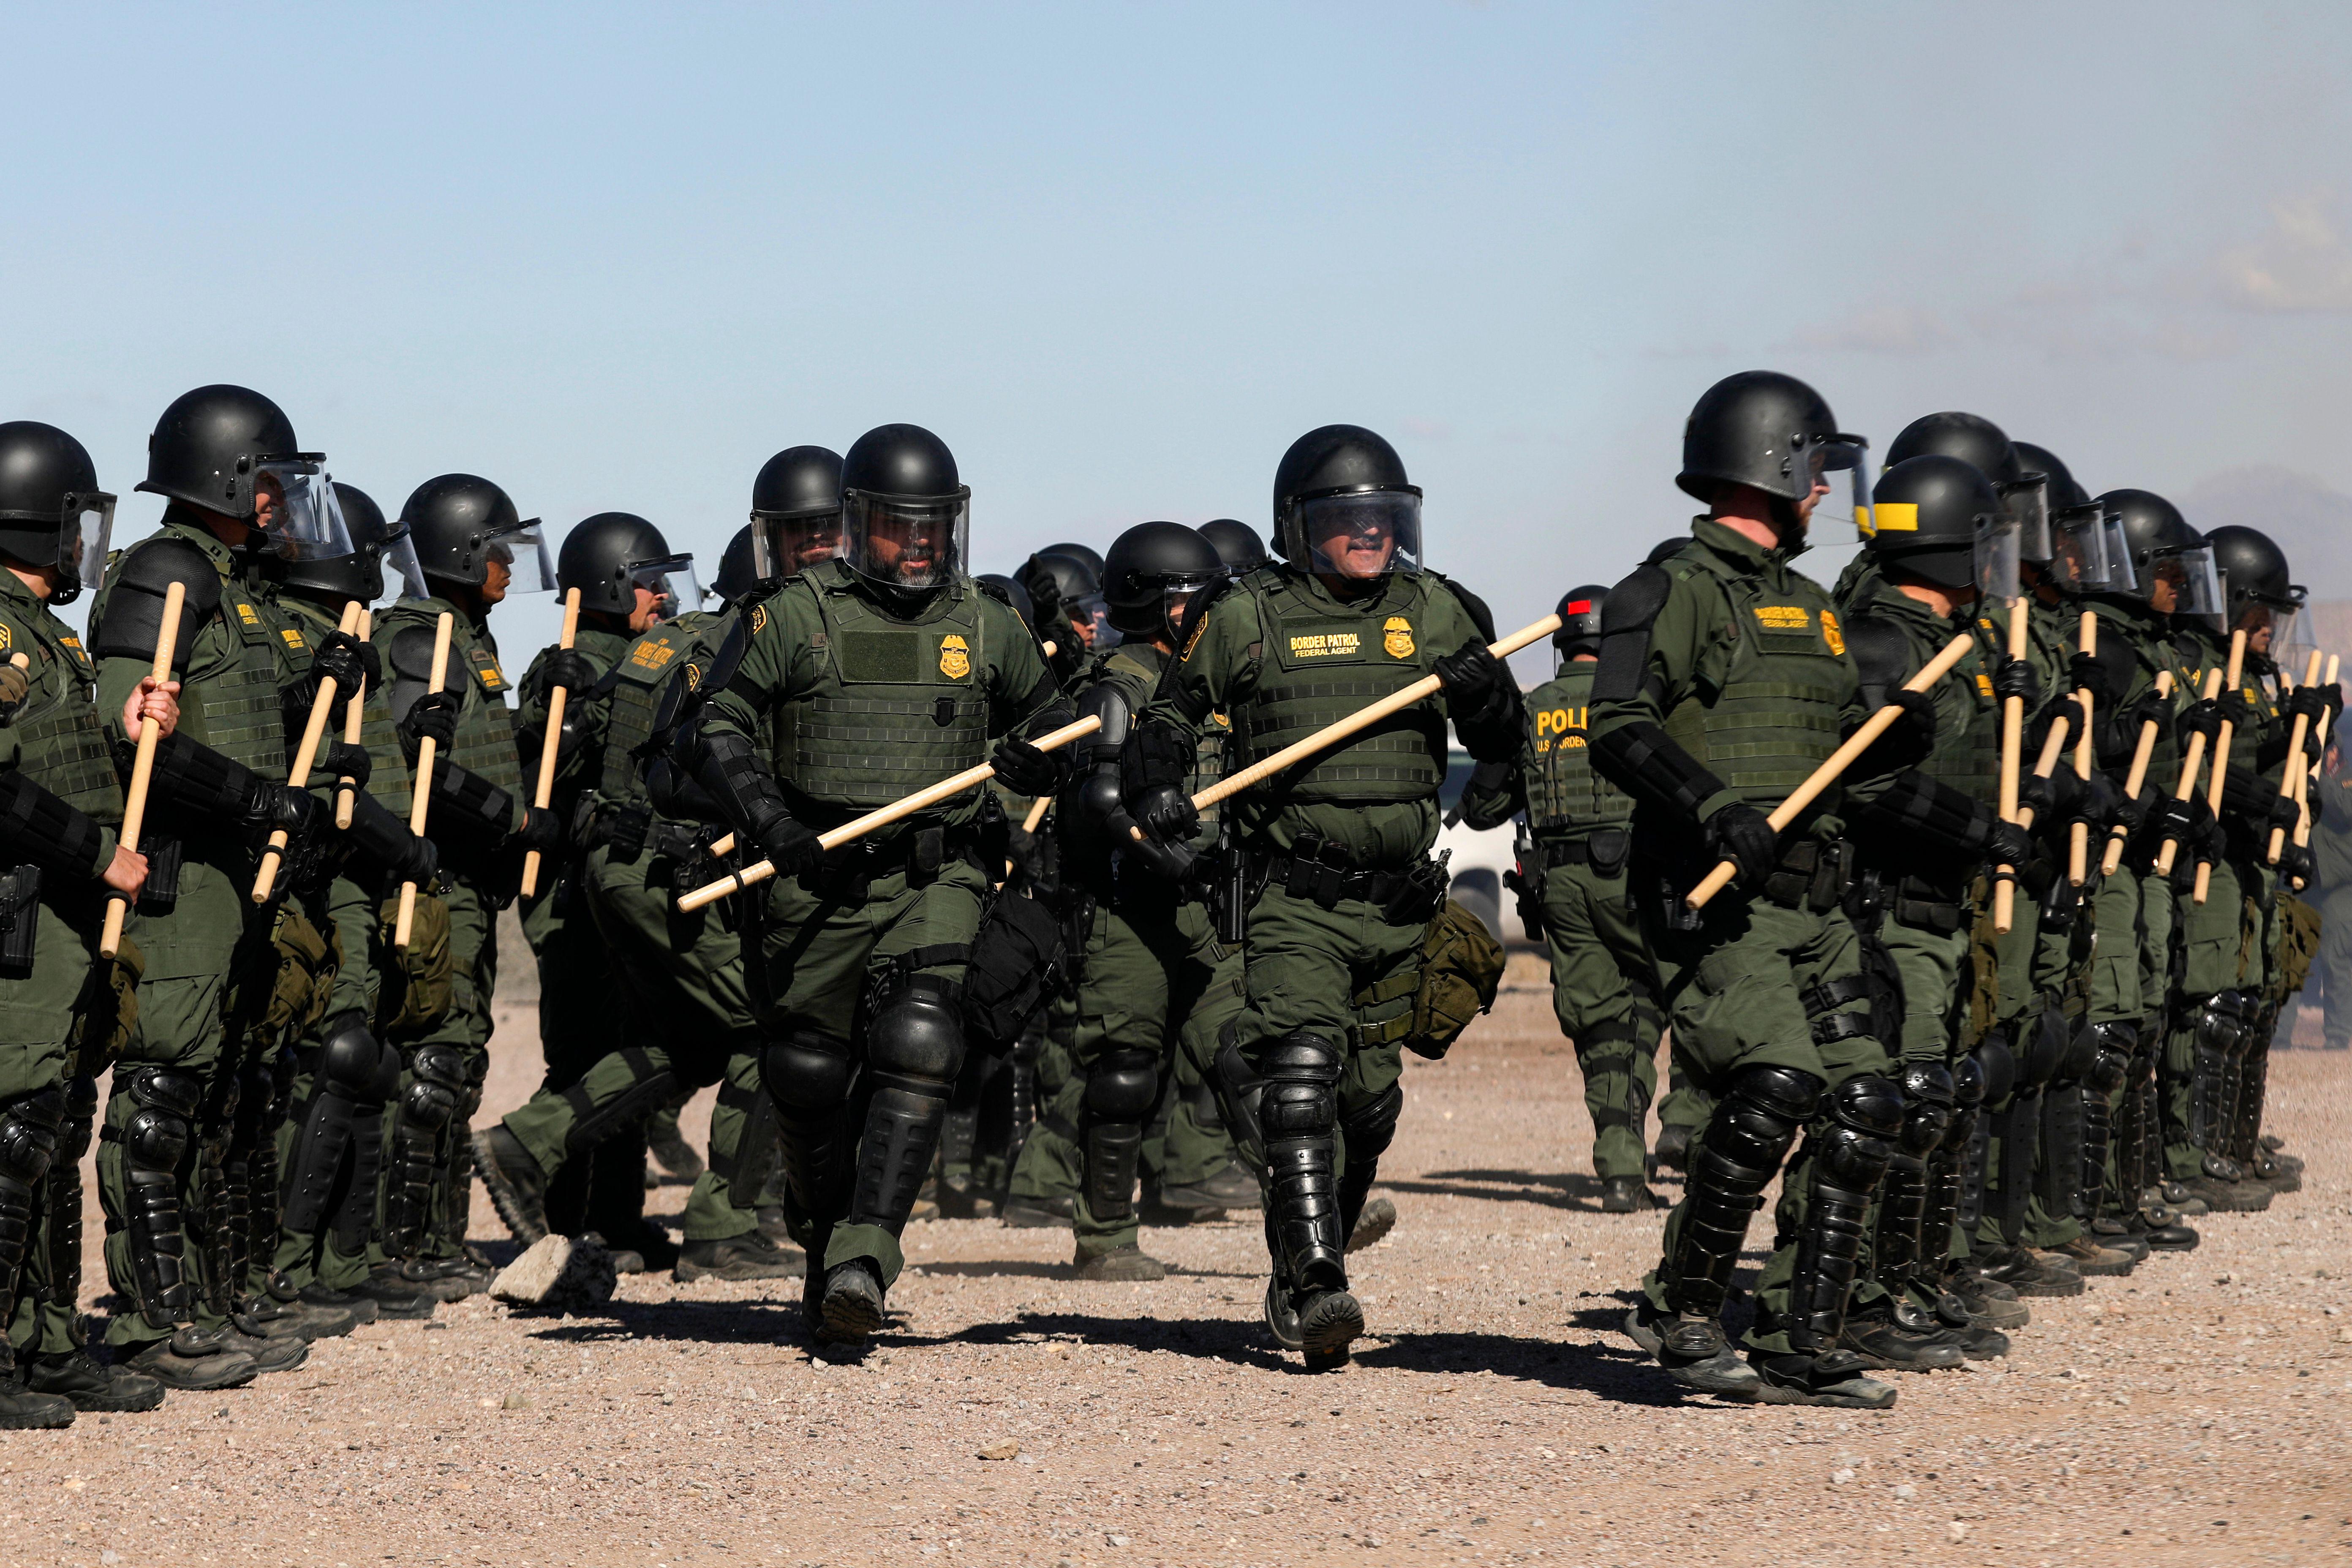 U.S. Border Patrol Agents, wearing uniforms and helmets and carrying batons